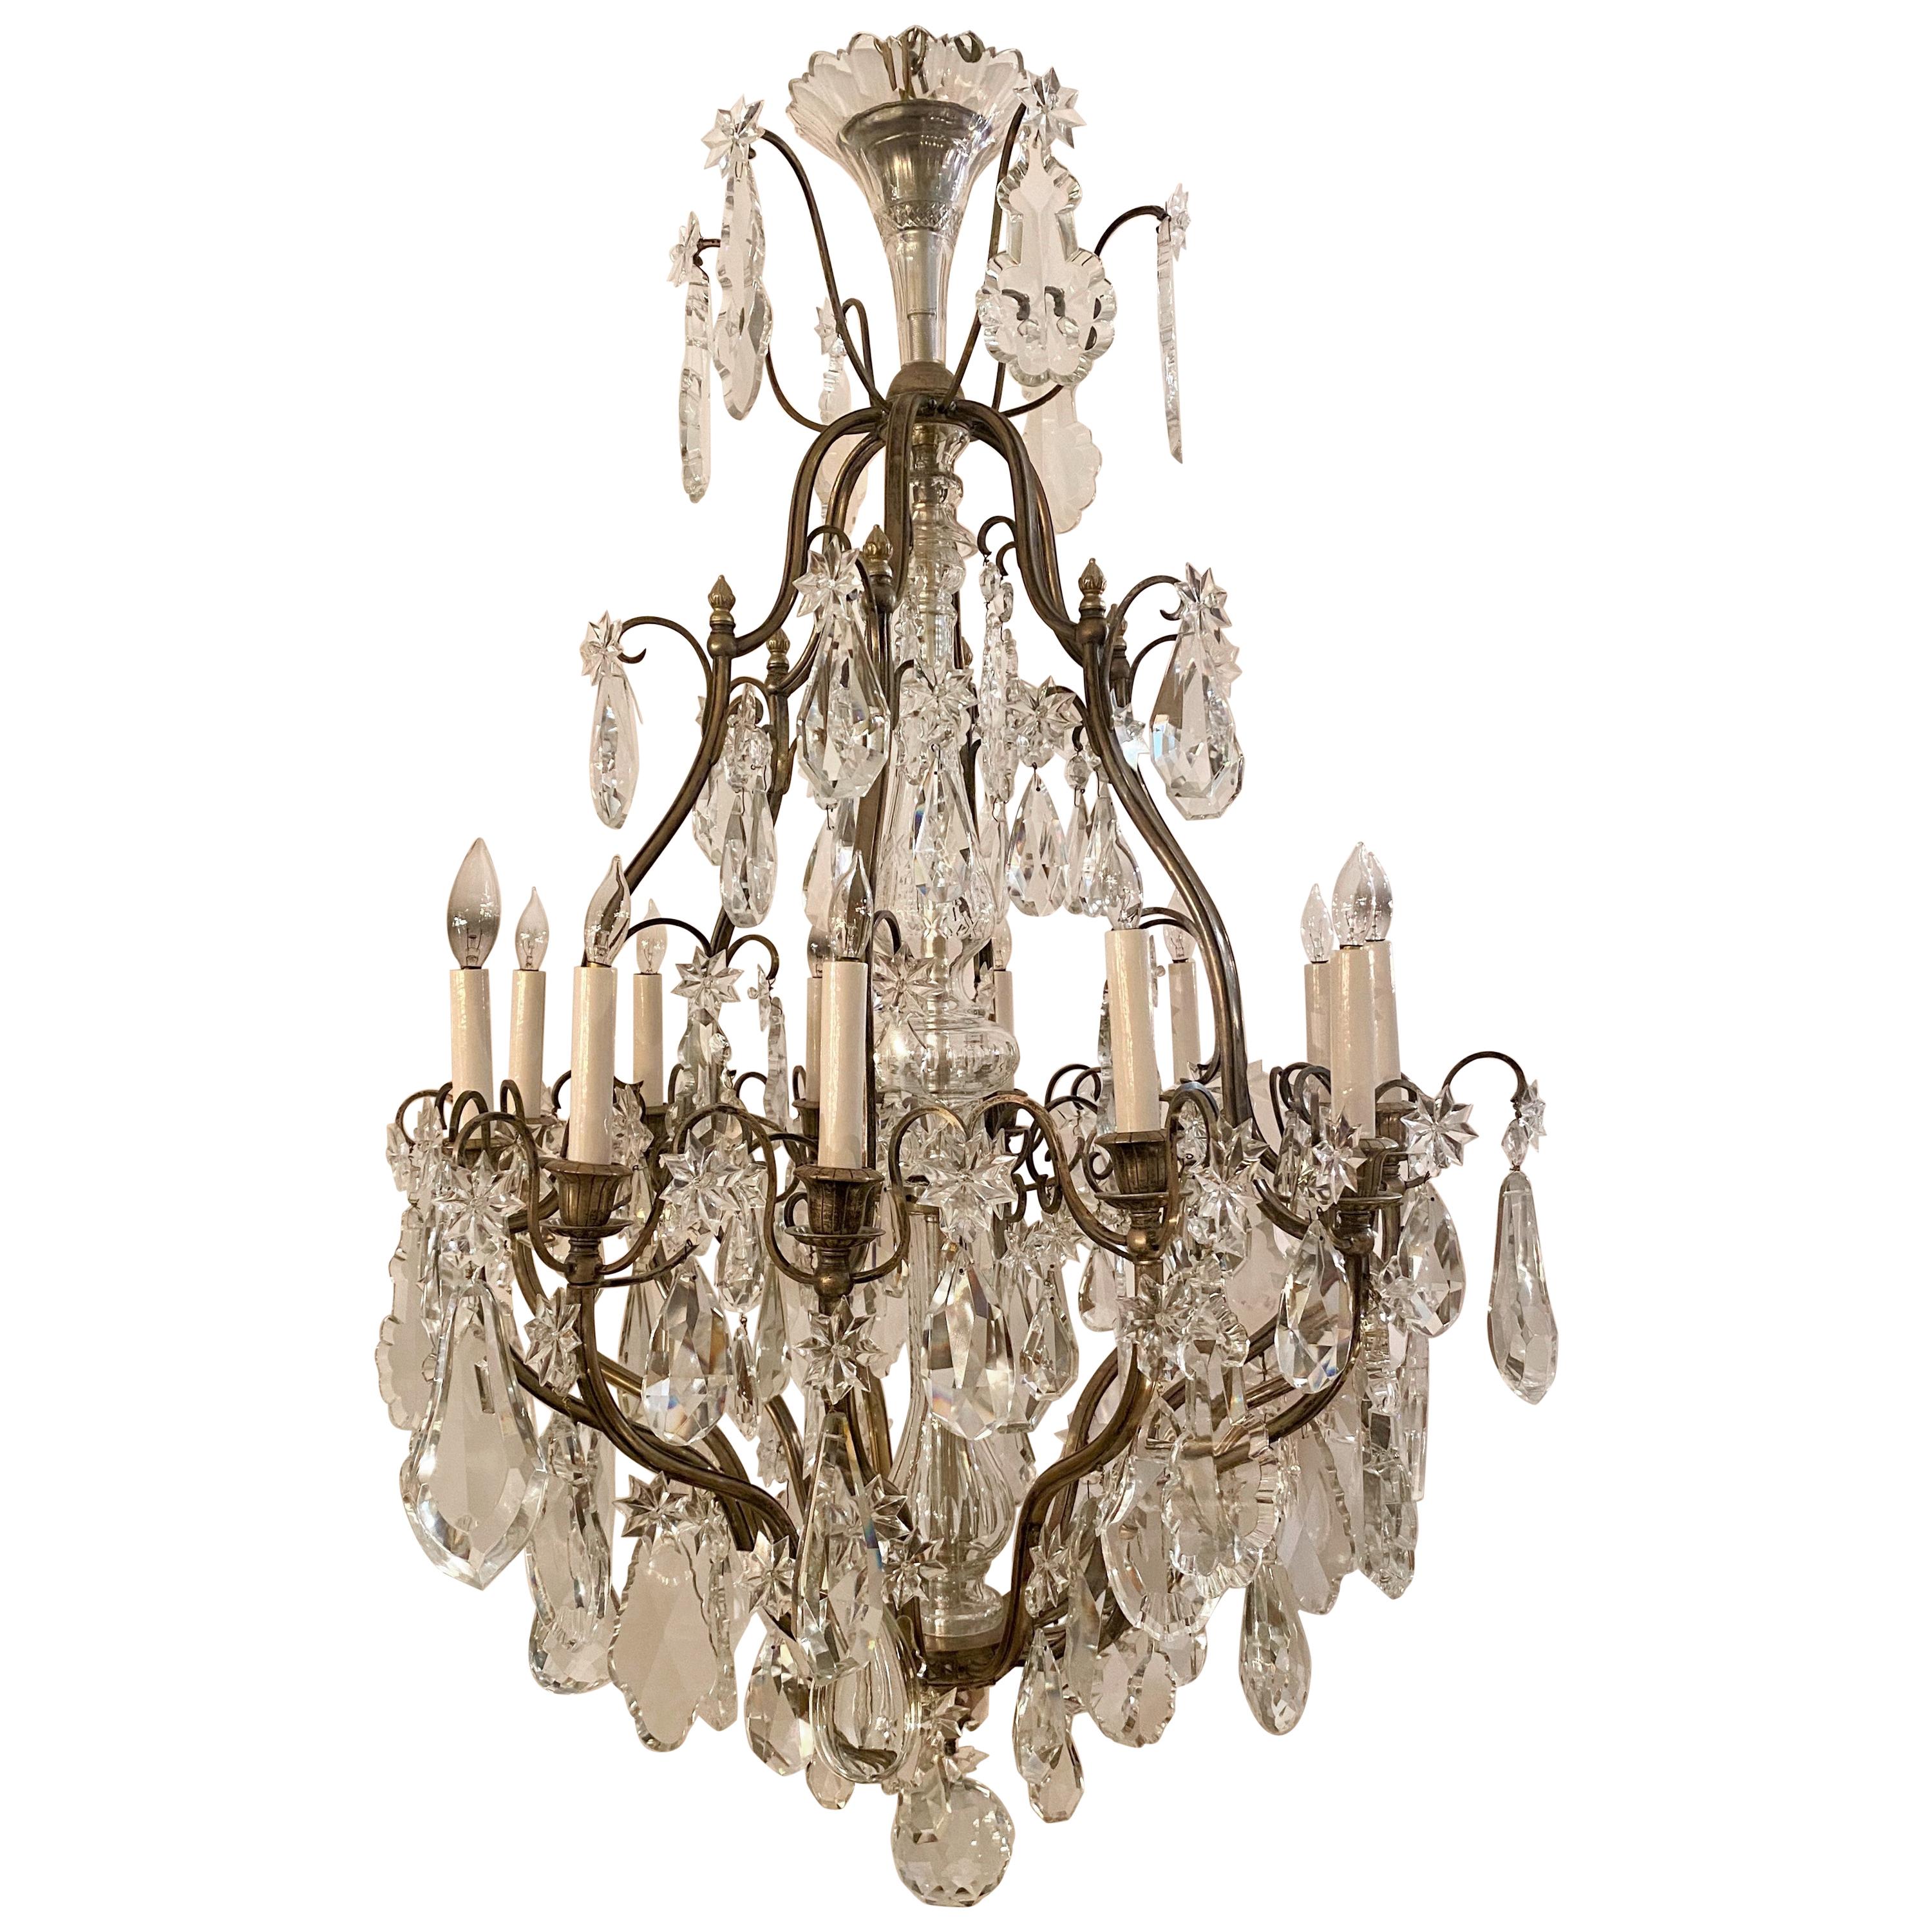 Antique French Belle Epoche Crystal and Silvered Bronze Chandelier, circa 1890s